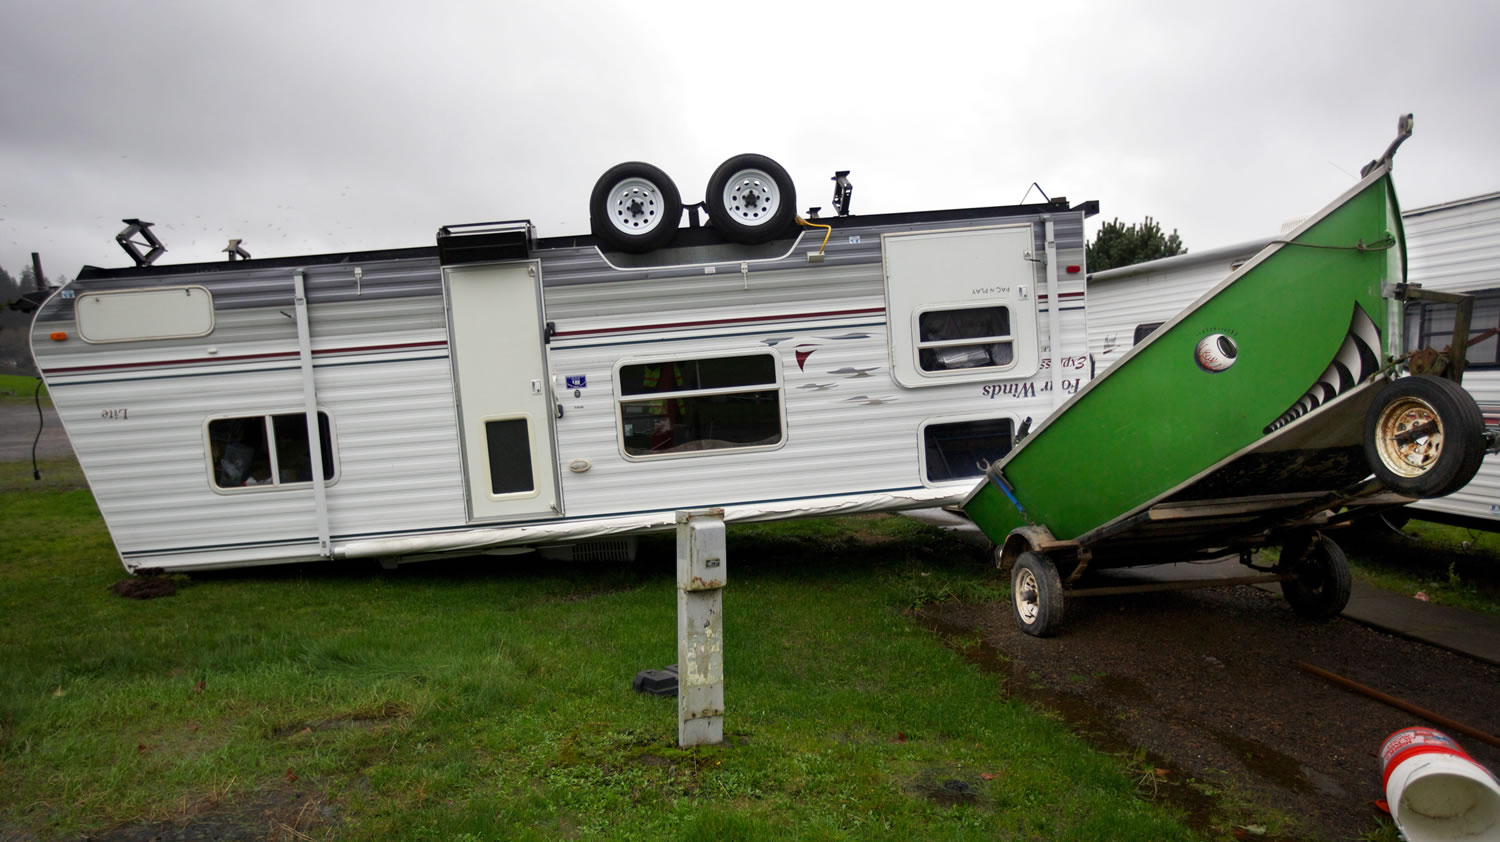 A camp trailer is left upside down at the Old Mill Marina trailer park in Garibaldi, Ore., after high winds and rain hit the Oregon Coast on Monday